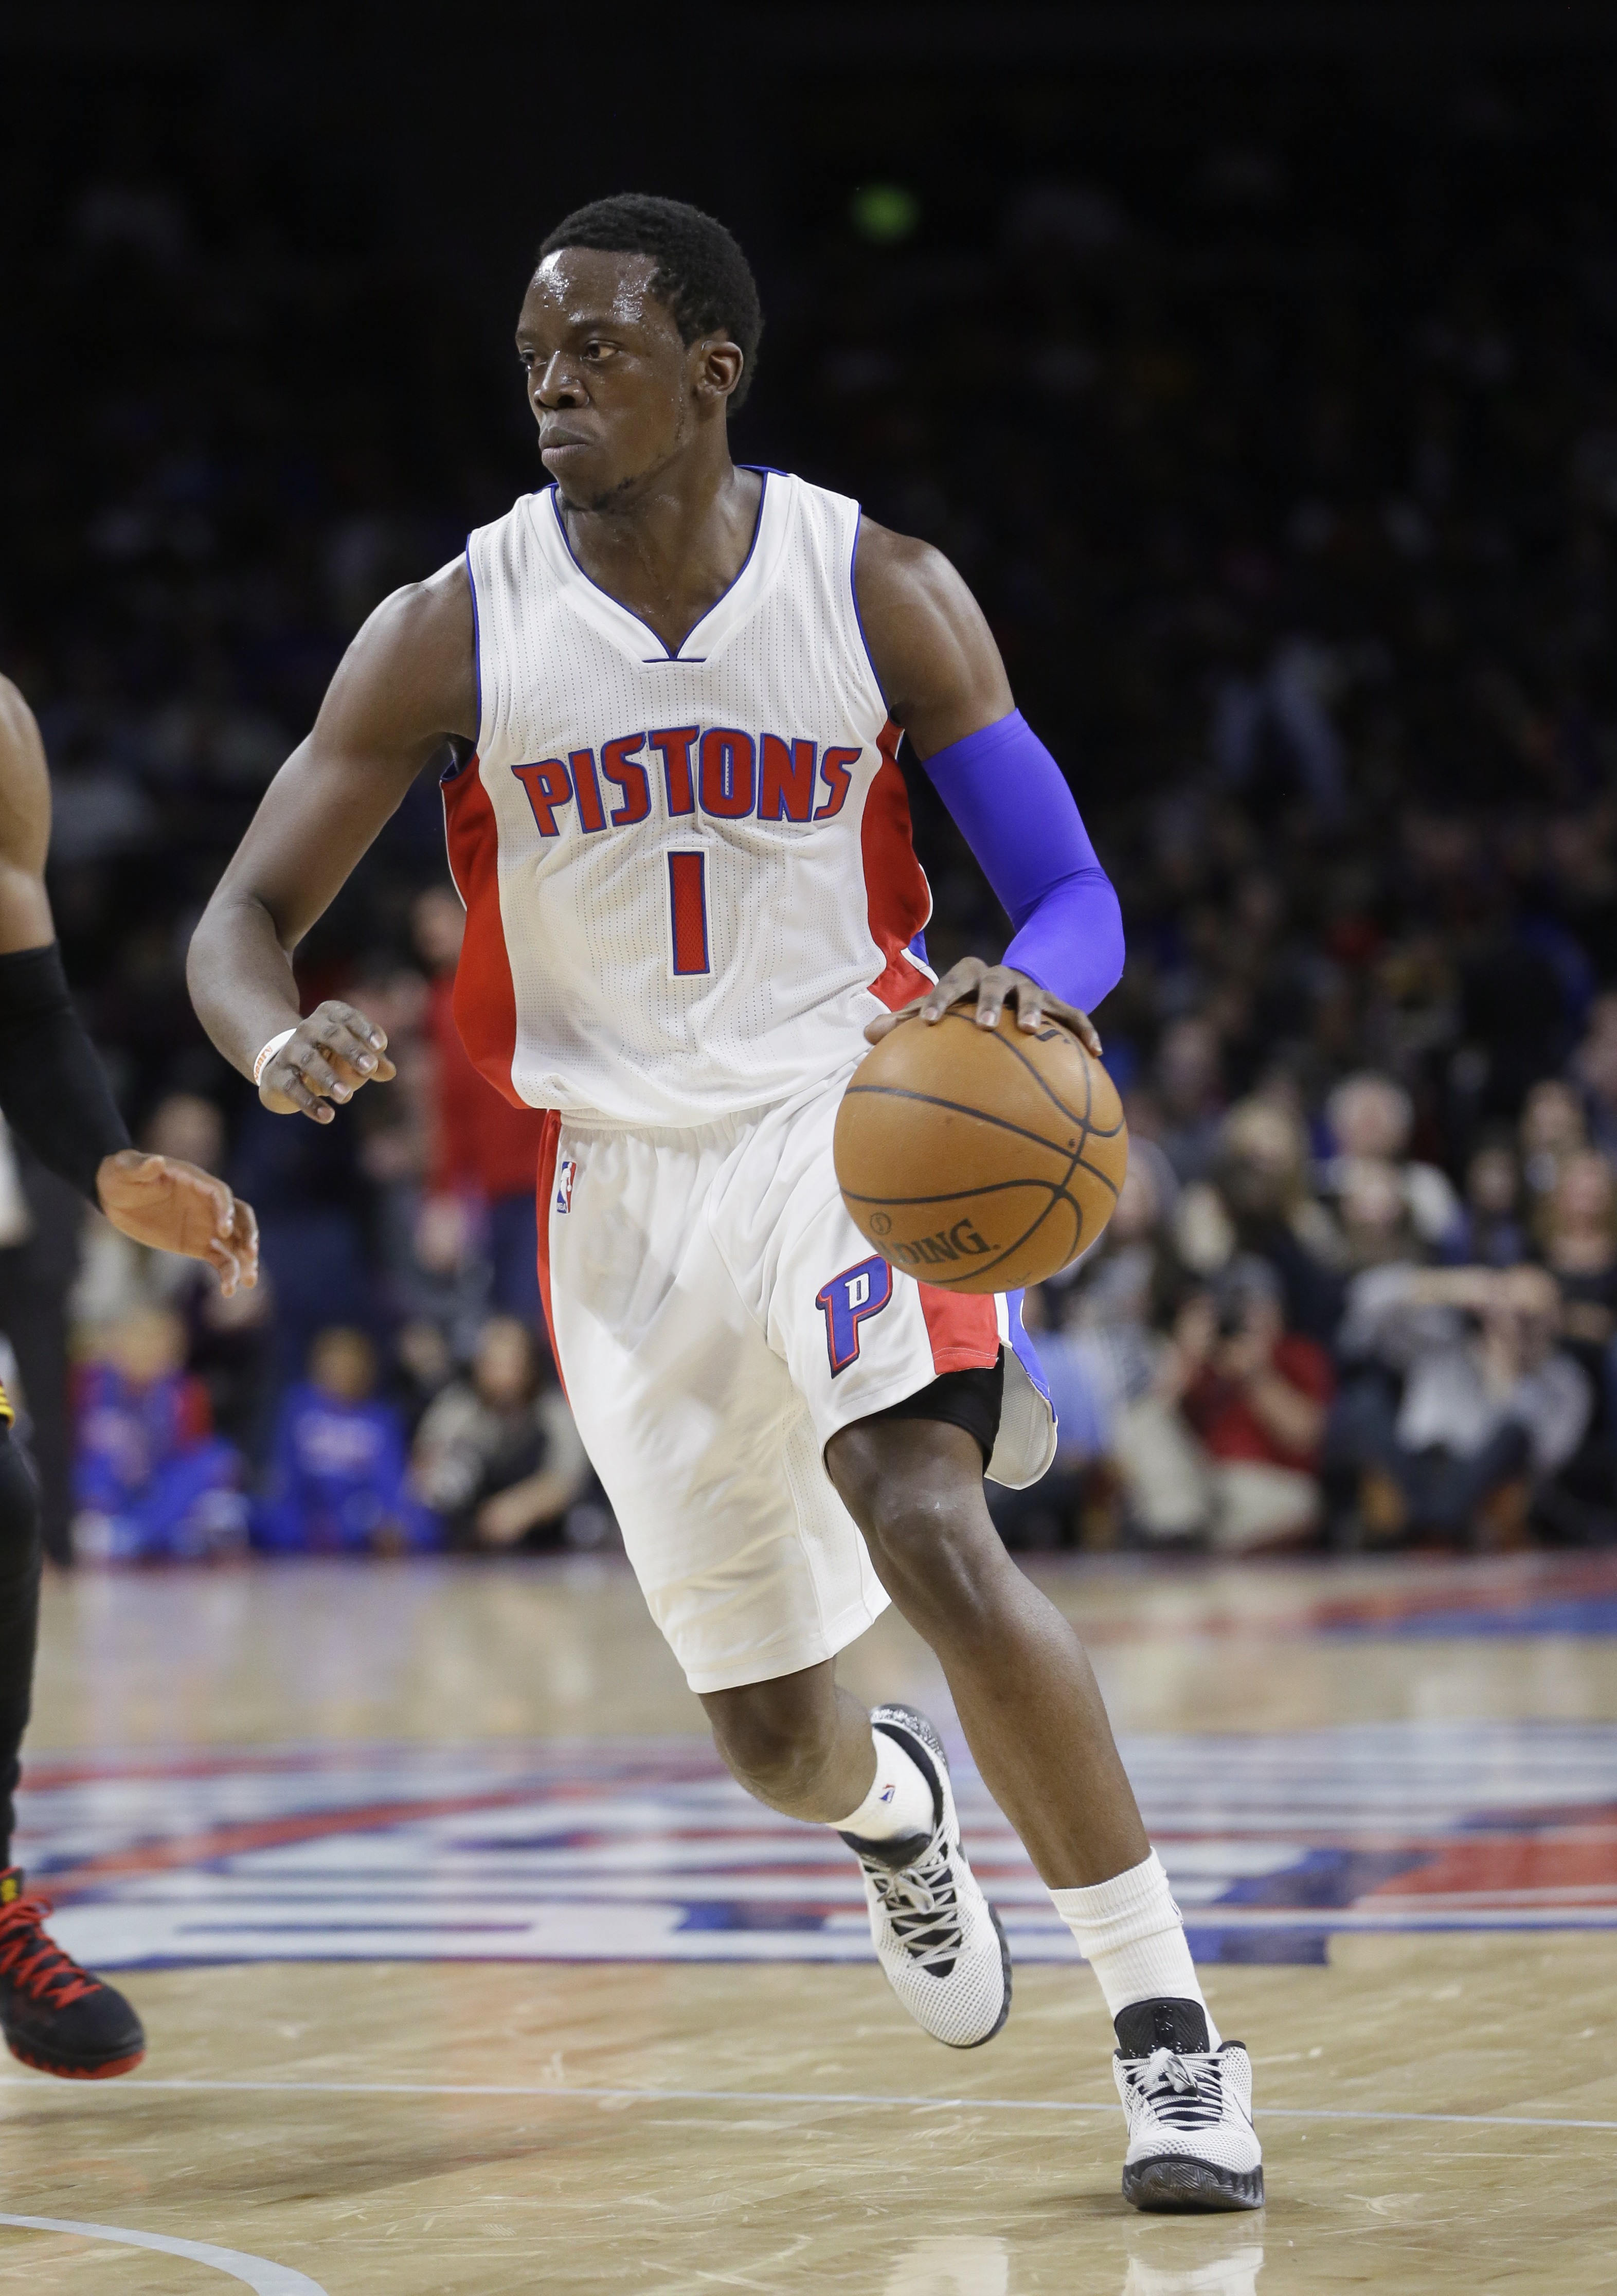 Could Pistons Keep Both Reggie Jackson and Brandon Jennings? The